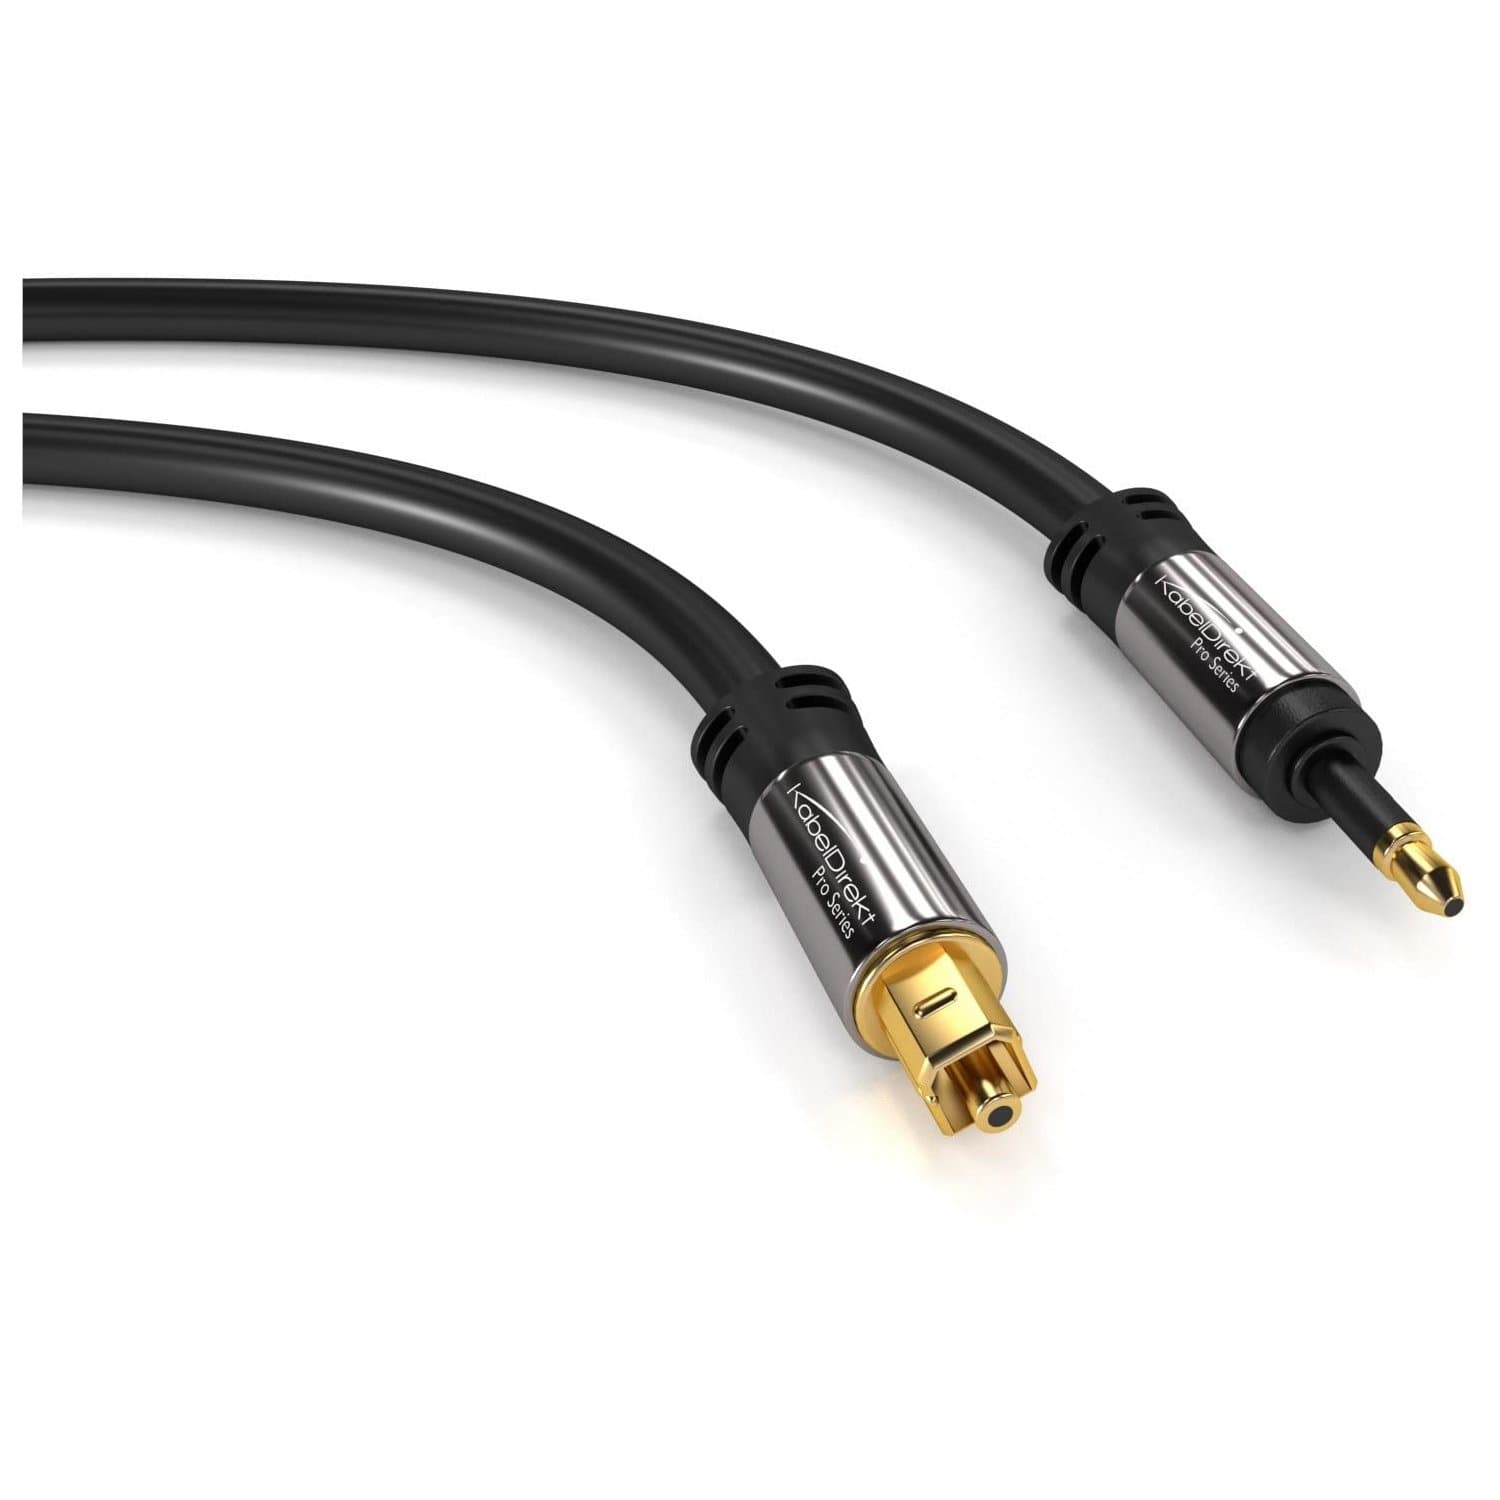 neef Transistor weerstand Mini-TOSLINK cable – digital audio cable, optical cable for notebooks -  KabelDirekt